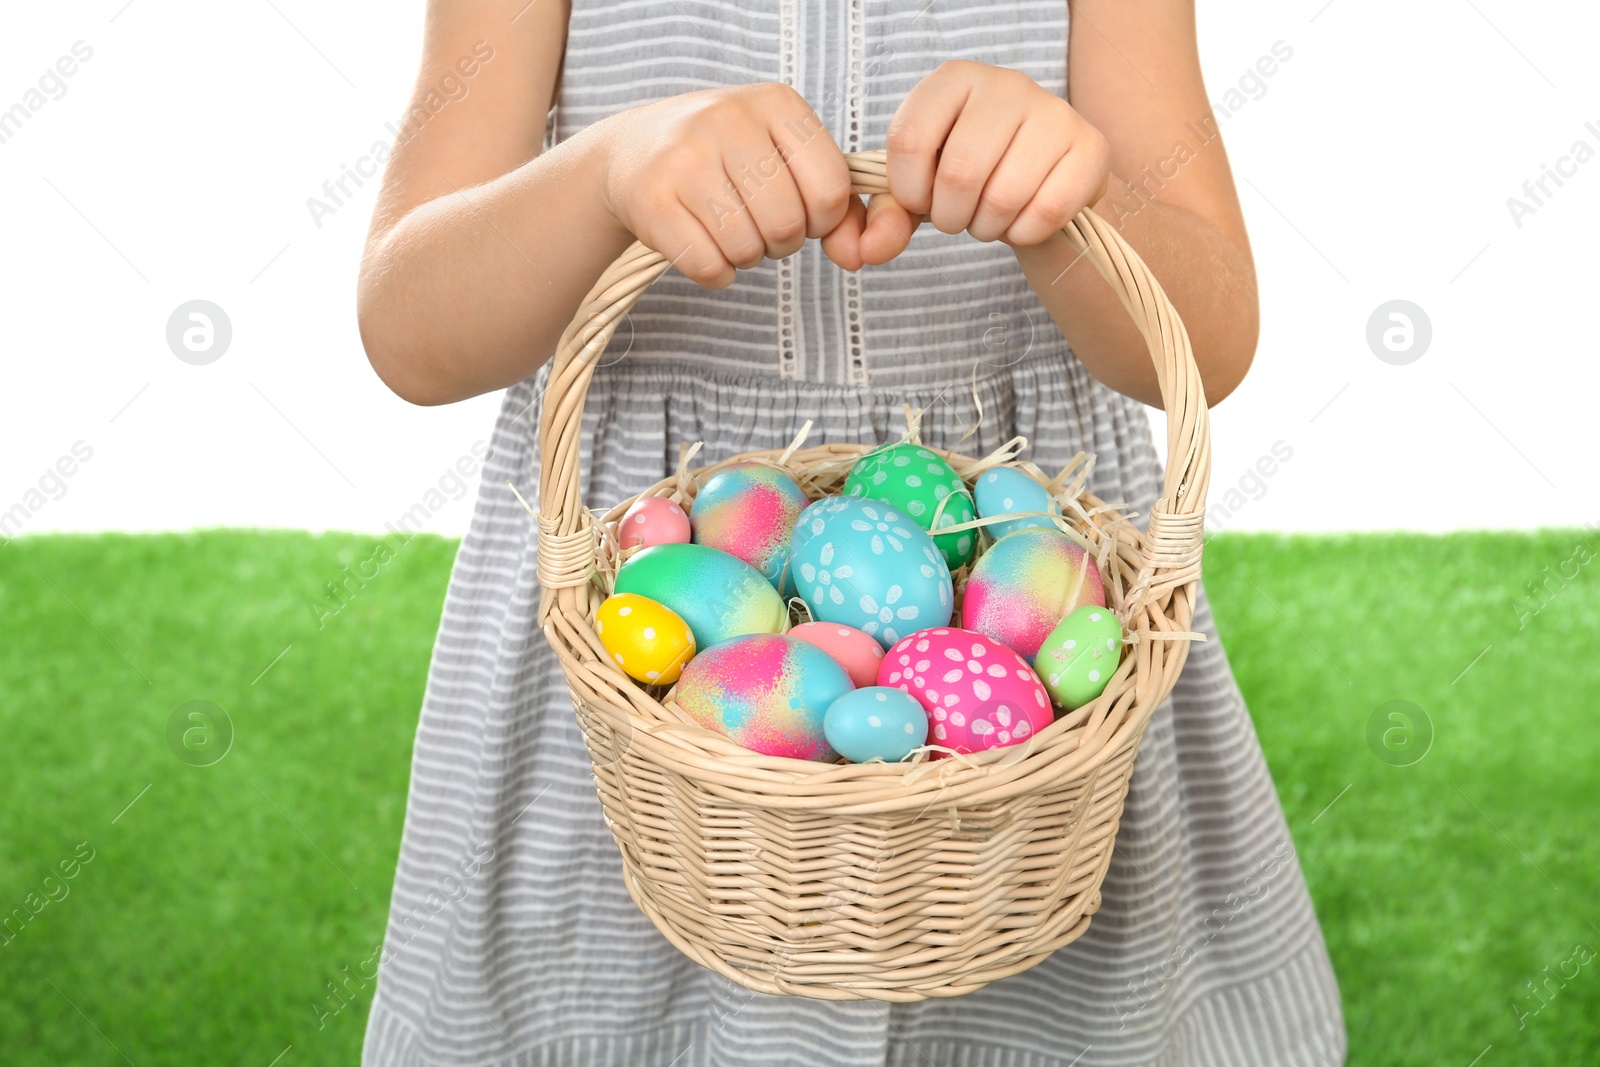 Photo of Little girl with basket full of Easter eggs on green grass against white background, closeup